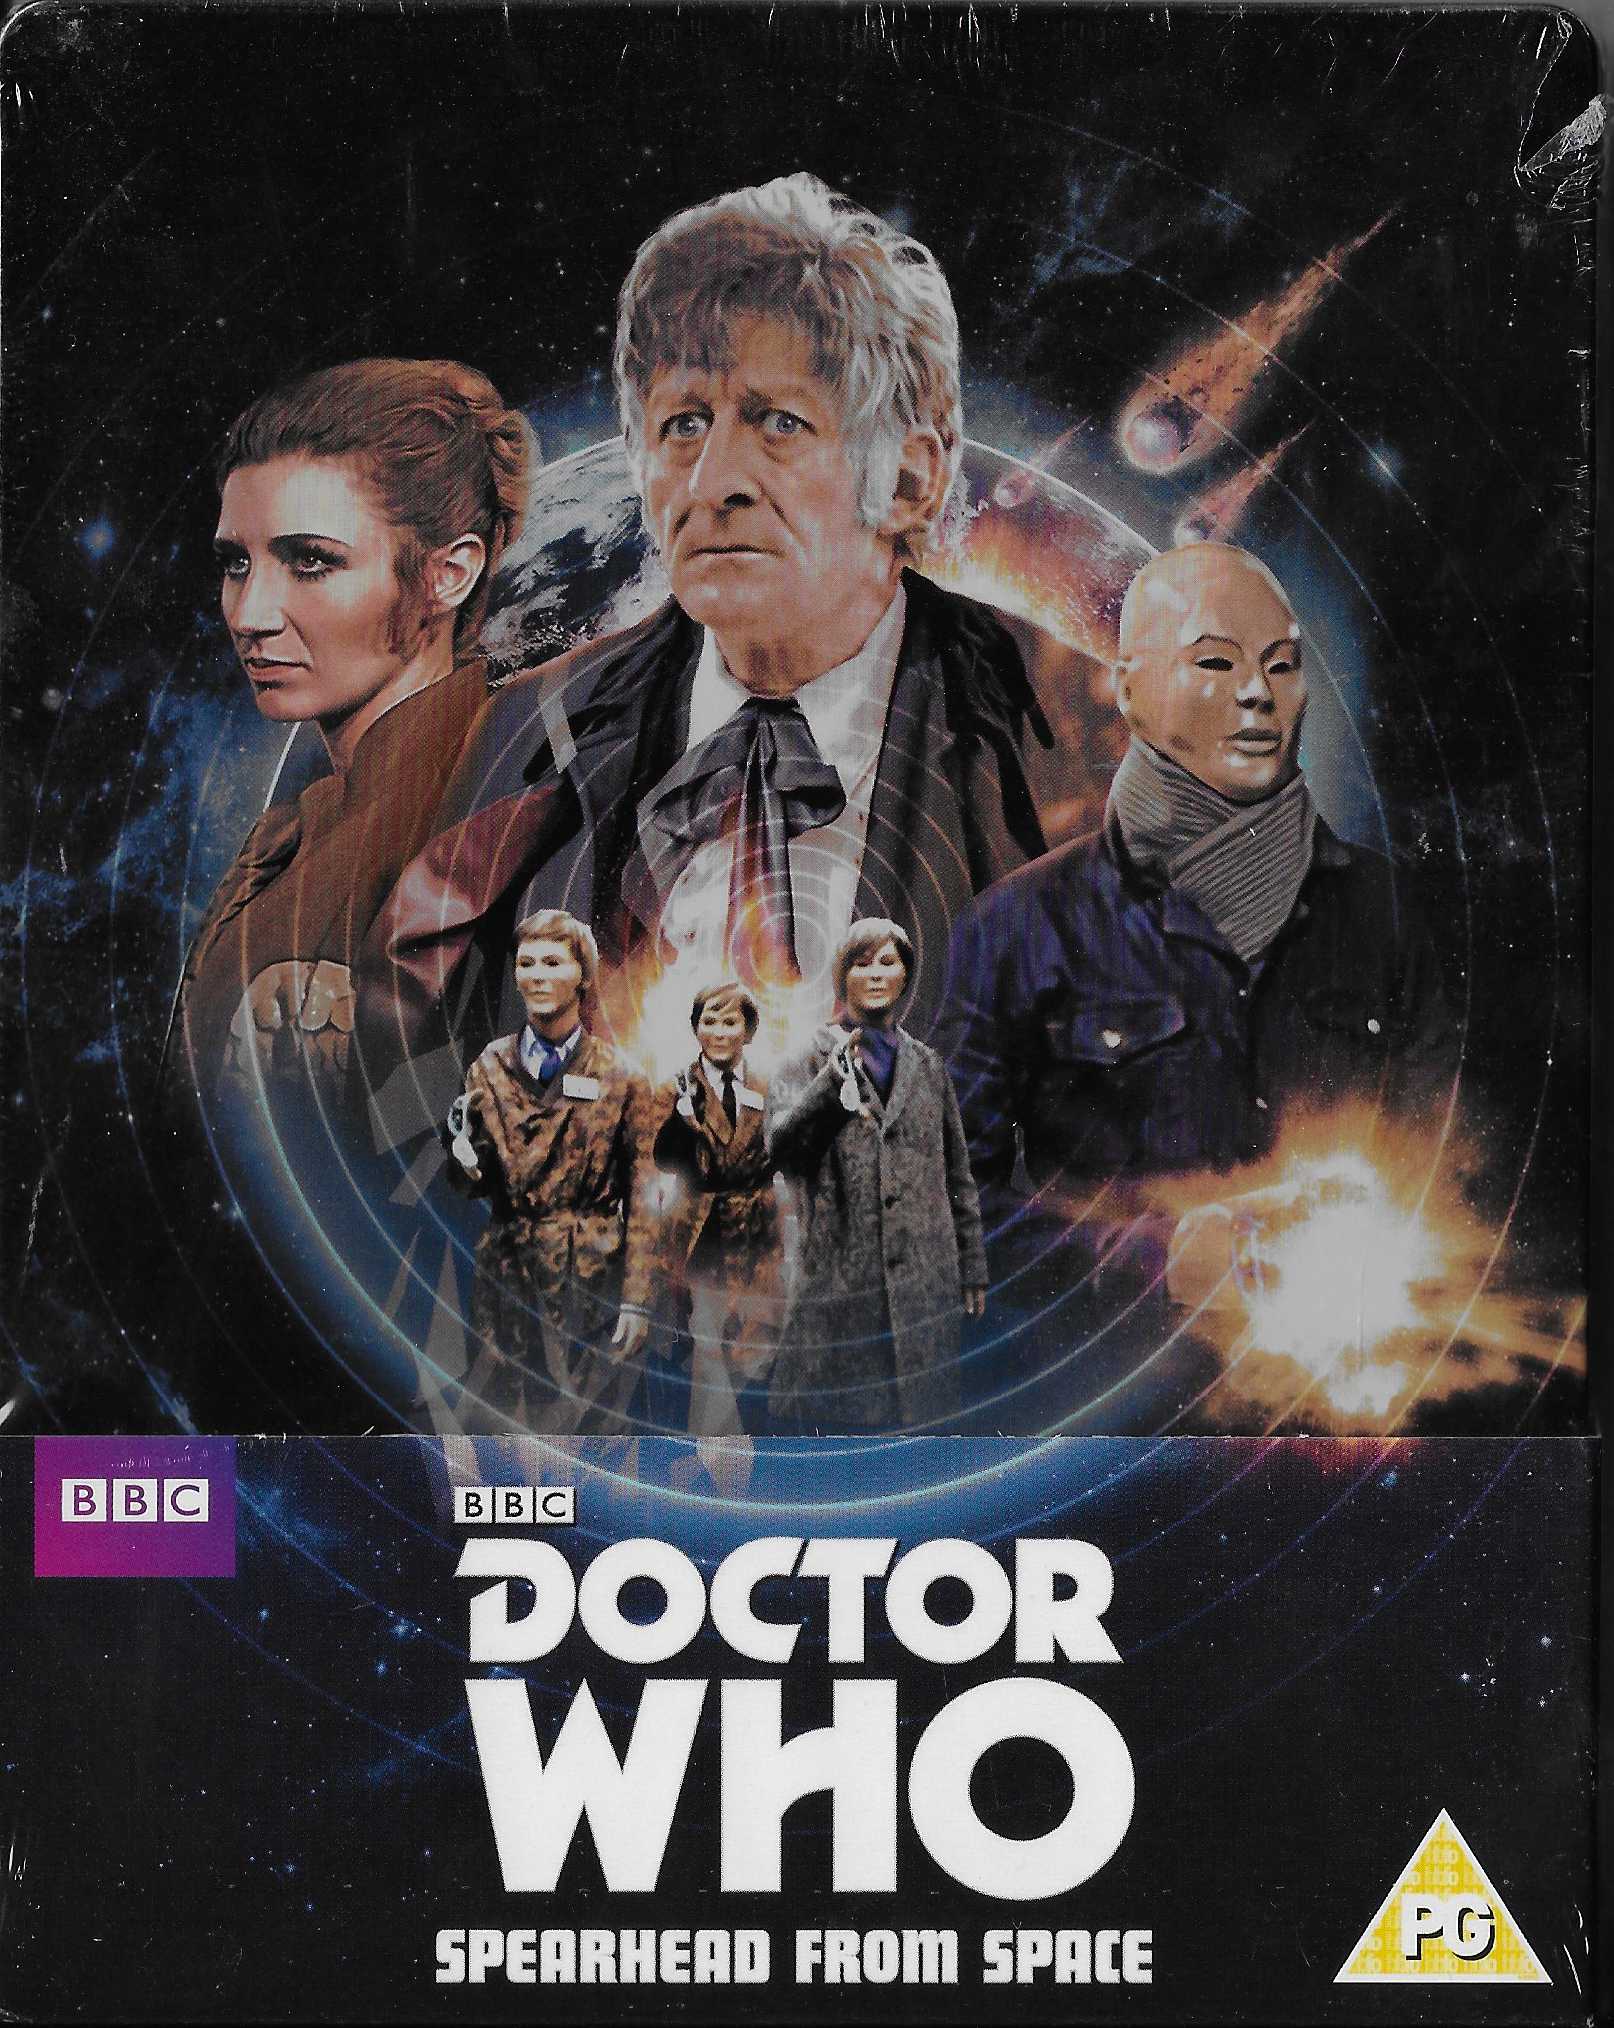 Picture of BBCBD 03444 Doctor Who - Spearhead from space (Limited Zavvi steelbook edition) by artist Robert Holmes from the BBC blu-rays - Records and Tapes library